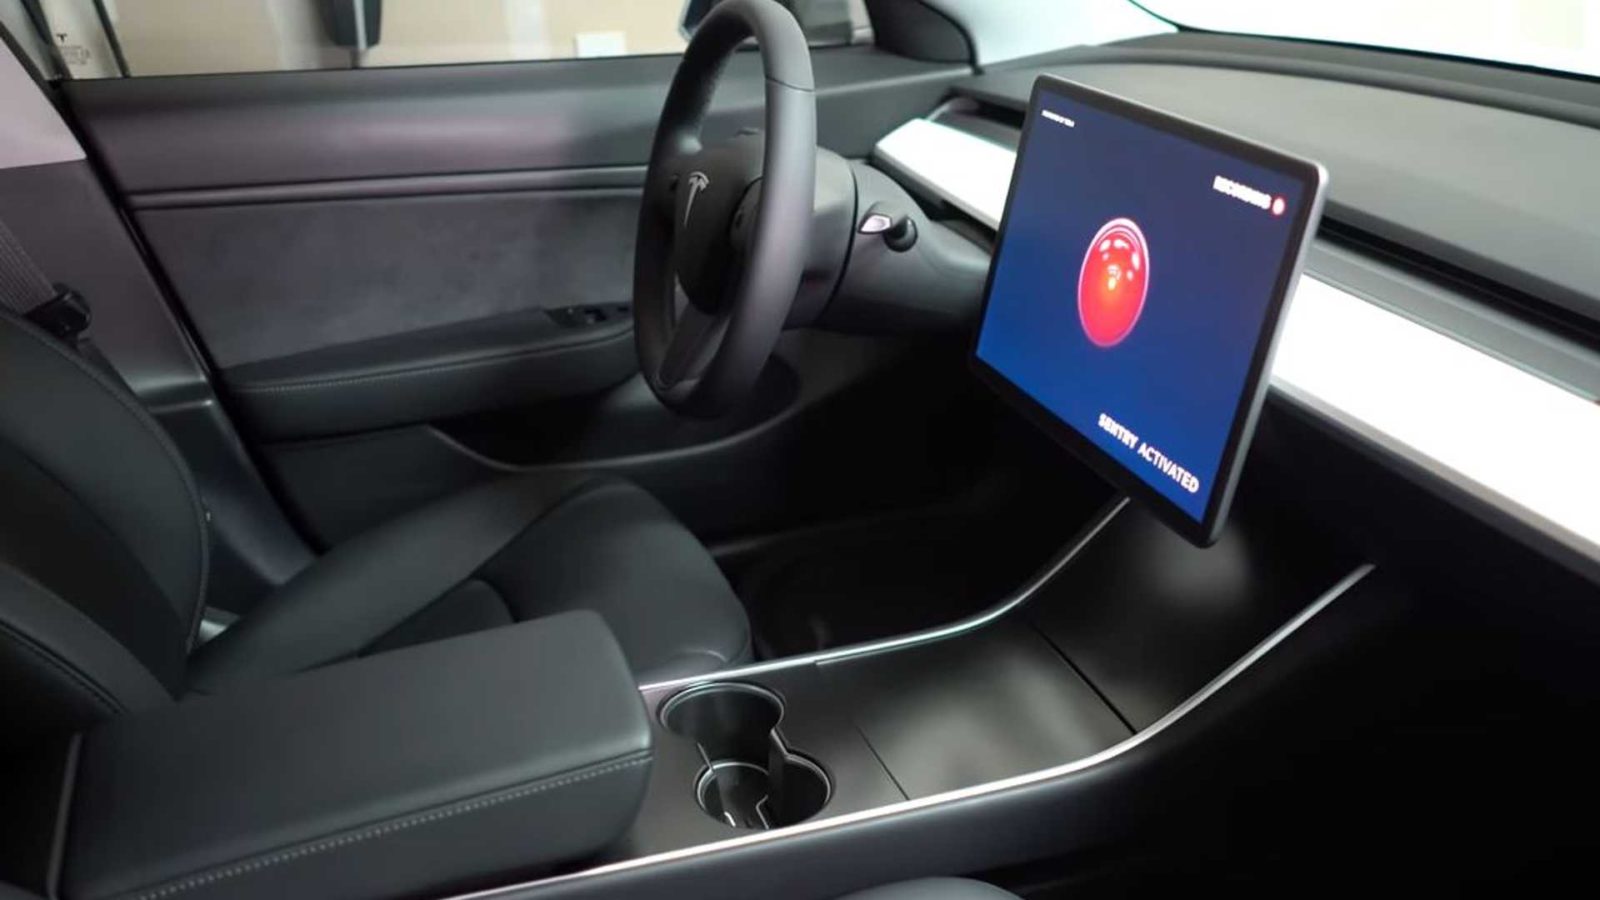 Tesla Sentry mode will remotely stream live footage from car cameras